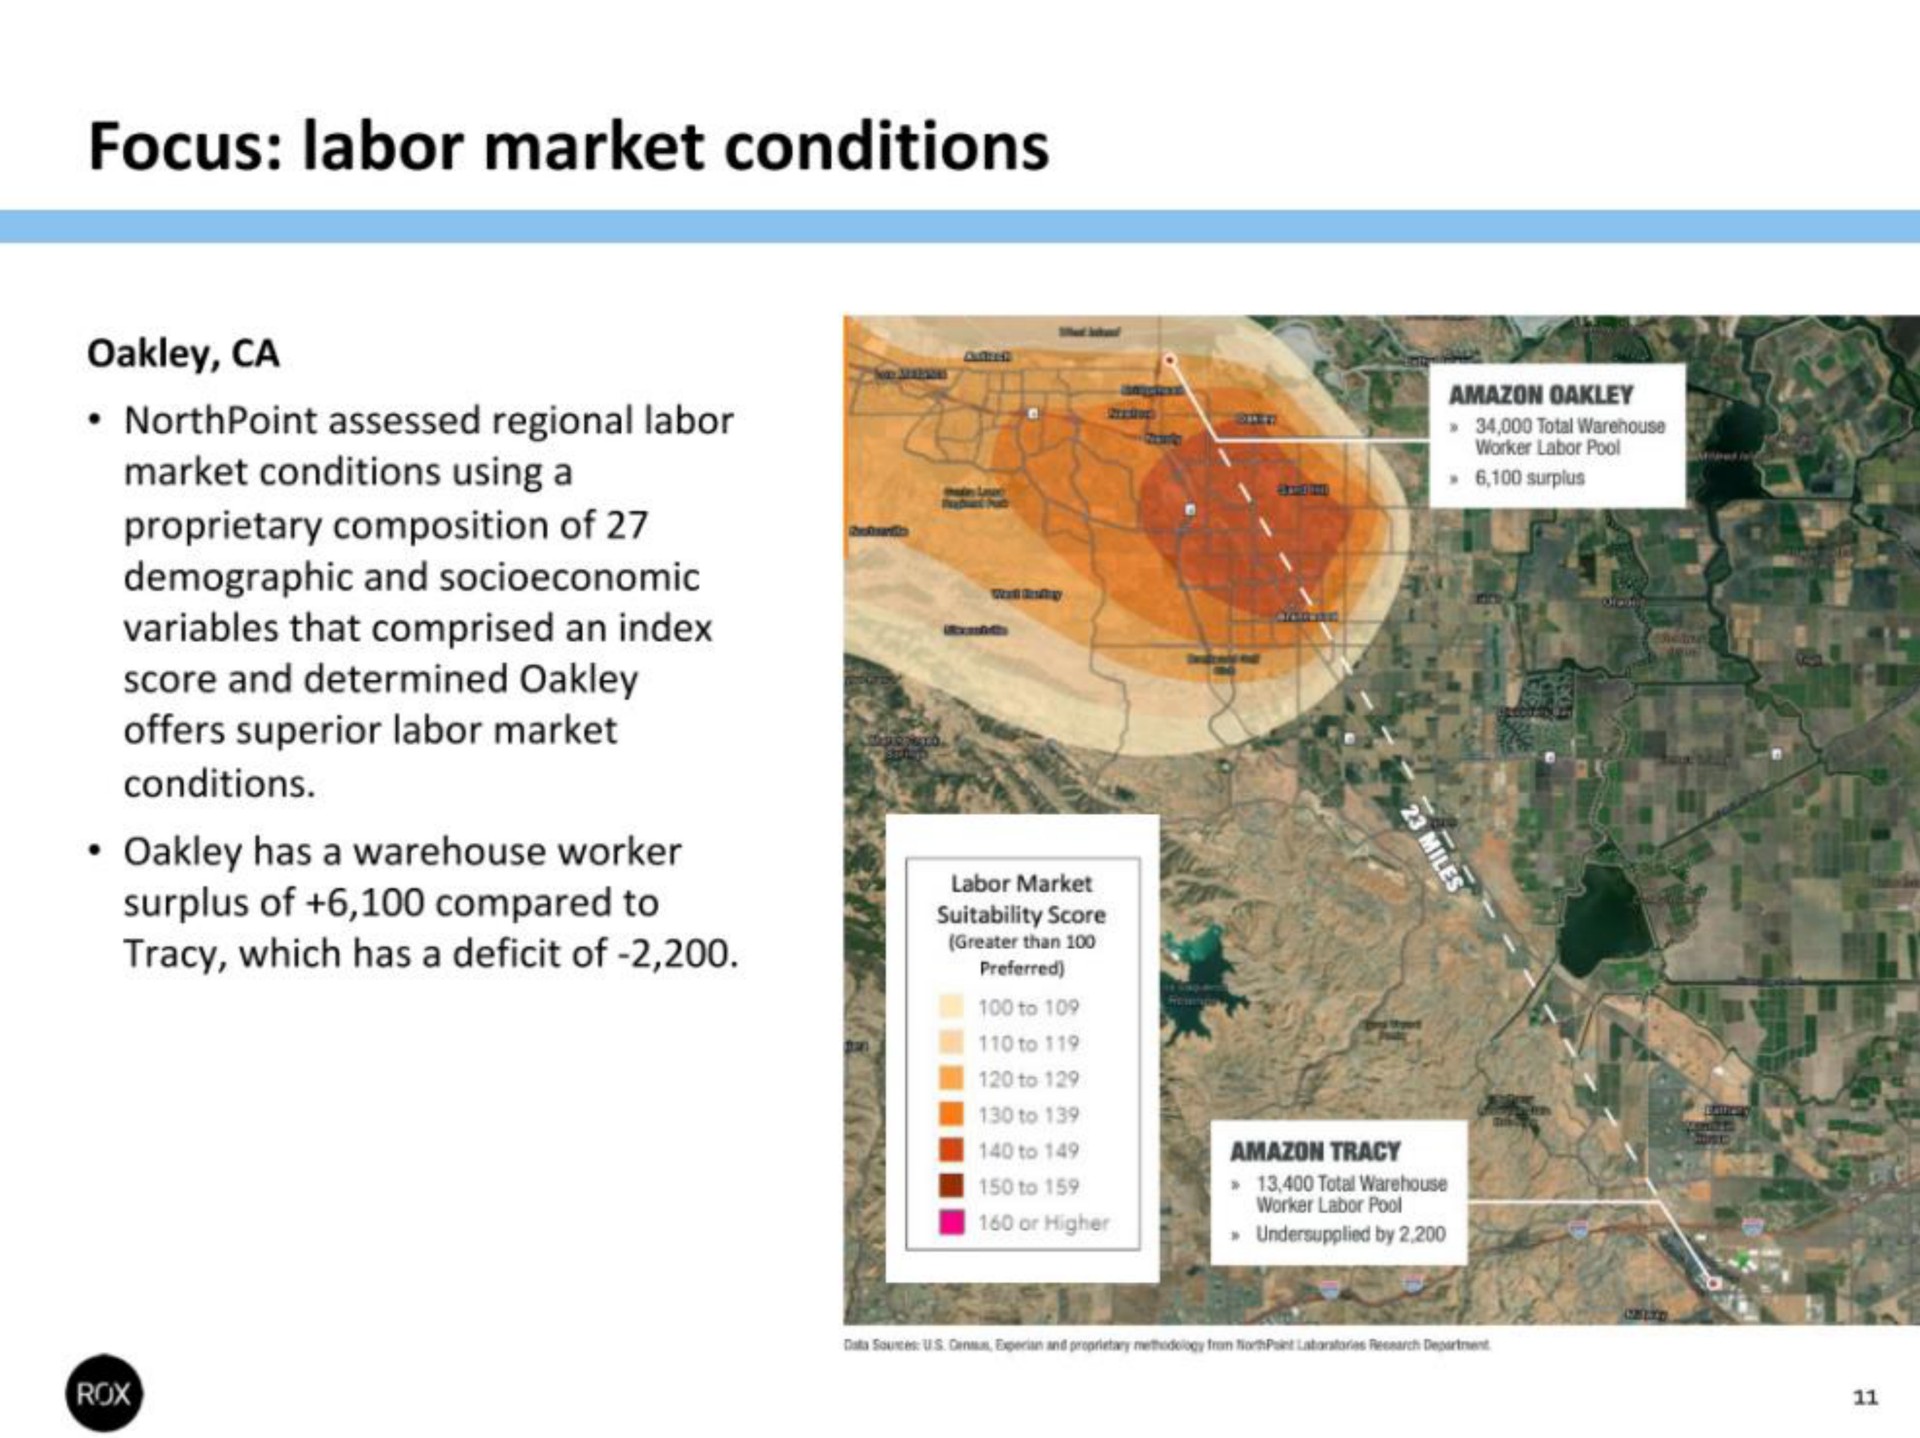 focus labor market conditions assessed regional labor market conditions using a proprietary composition of demographic and socioeconomic variables that comprised an index score and determined offers superior labor market conditions has a warehouse worker surplus of compared to which has a deficit of total surplus to | ROX Financial